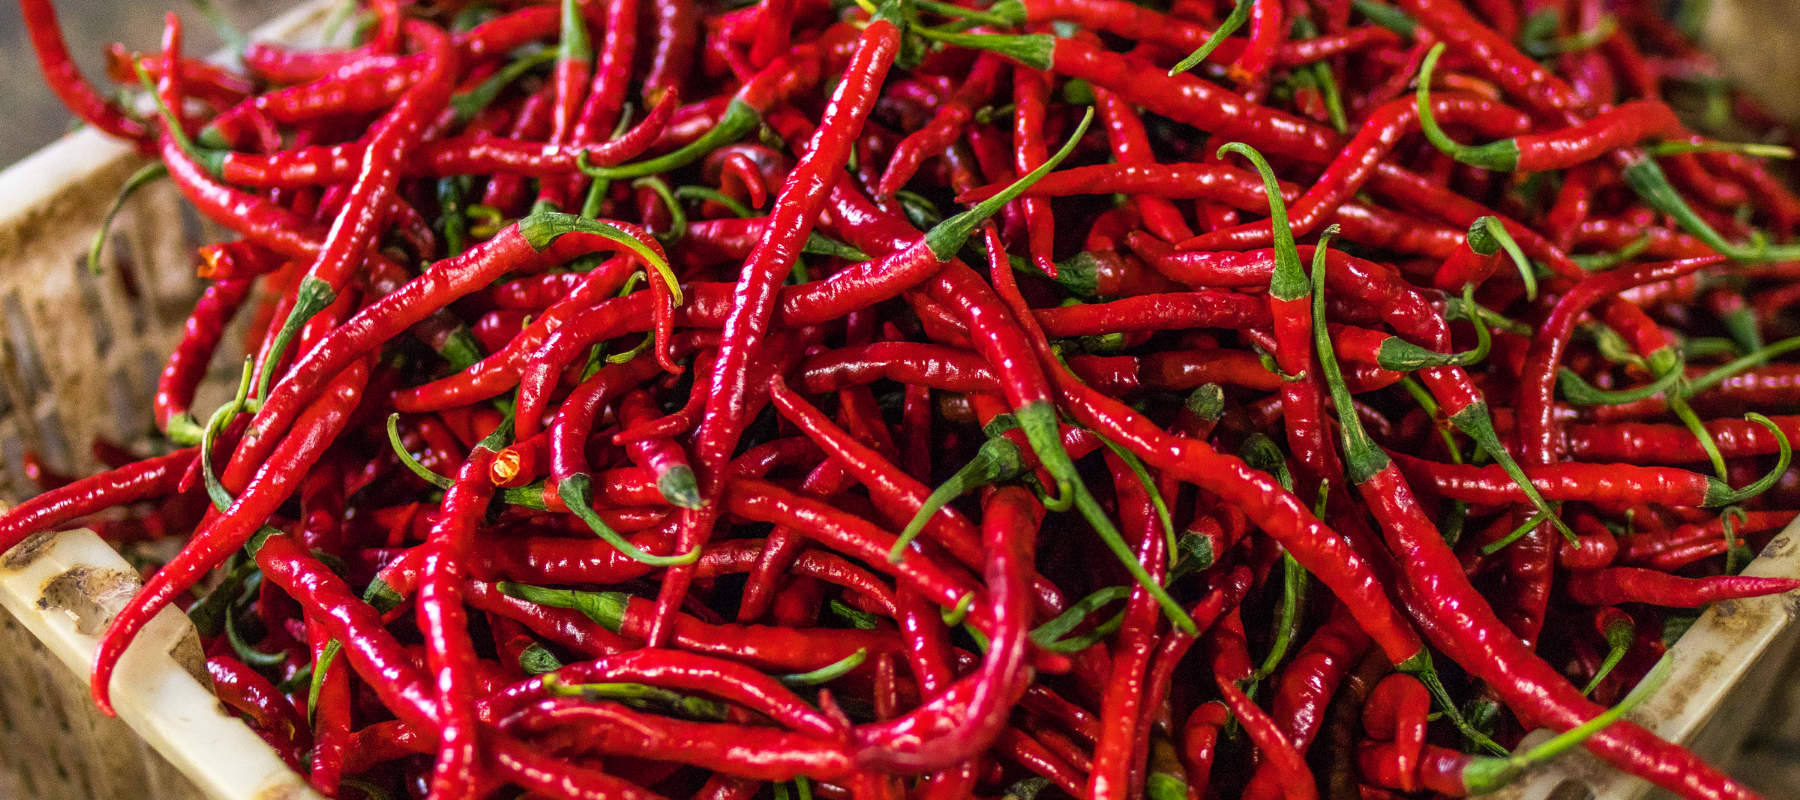 Chillies: Some like them hot, some don't